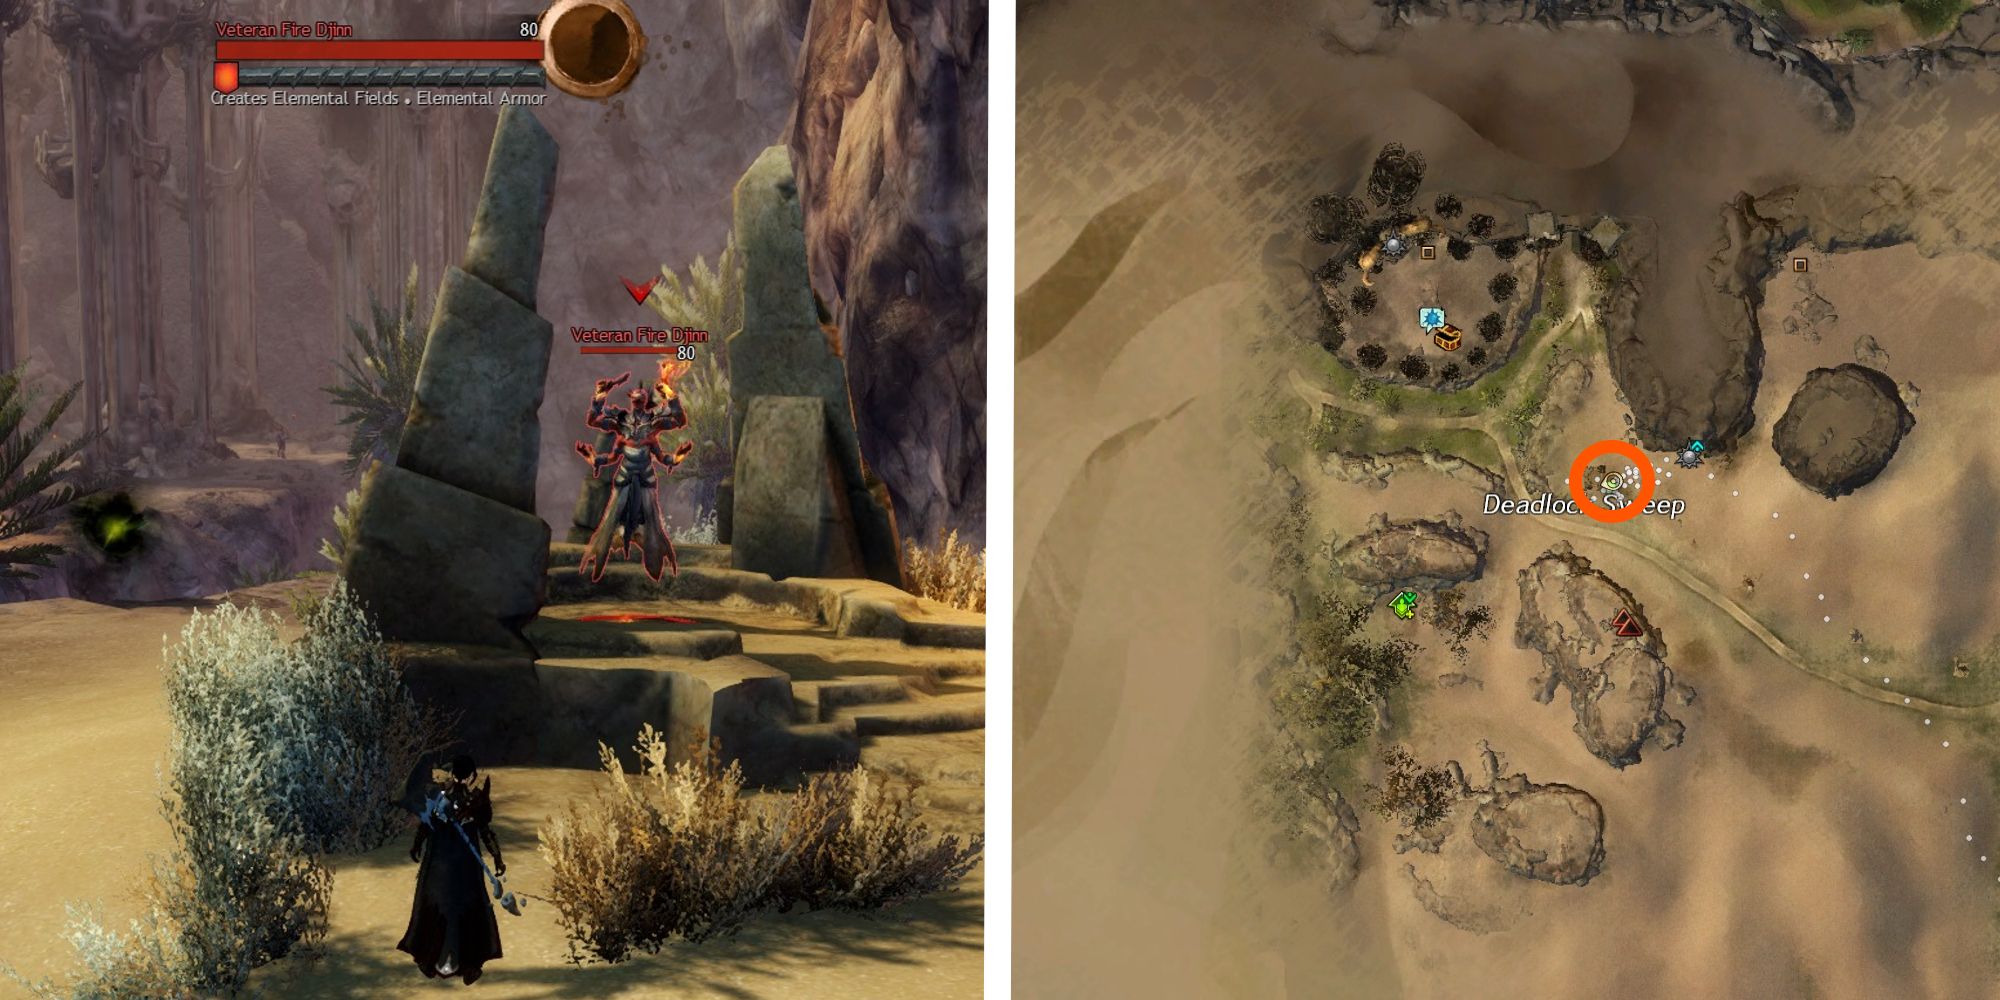 image of player facing veteran fire djinn next to image of location on map